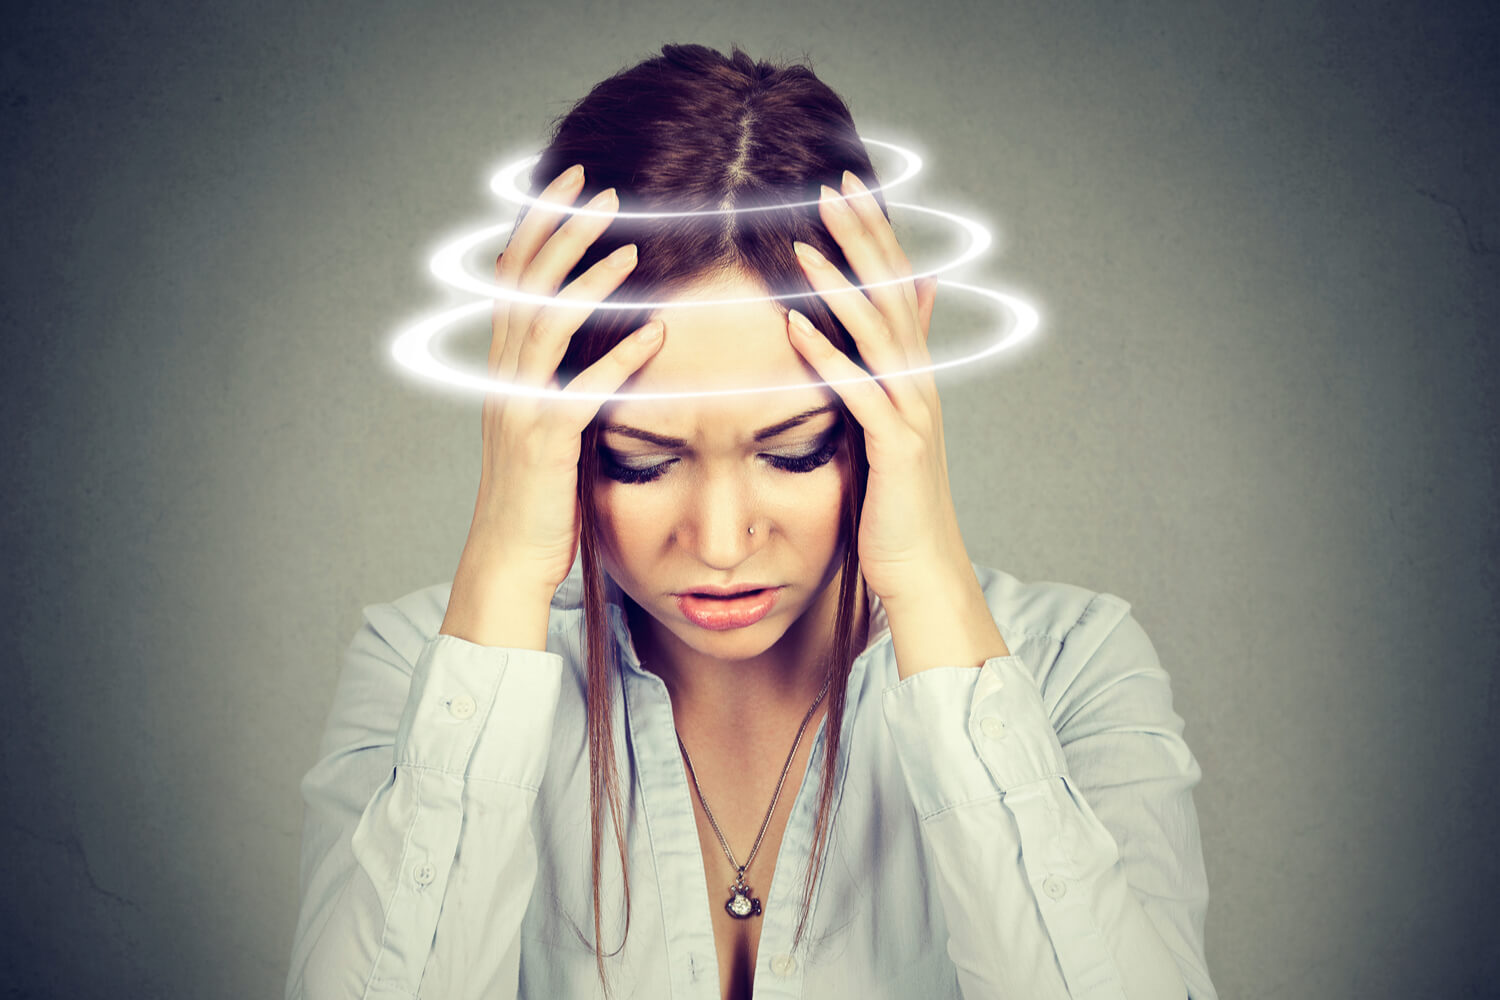 dizziness - signs you are pregnant or not